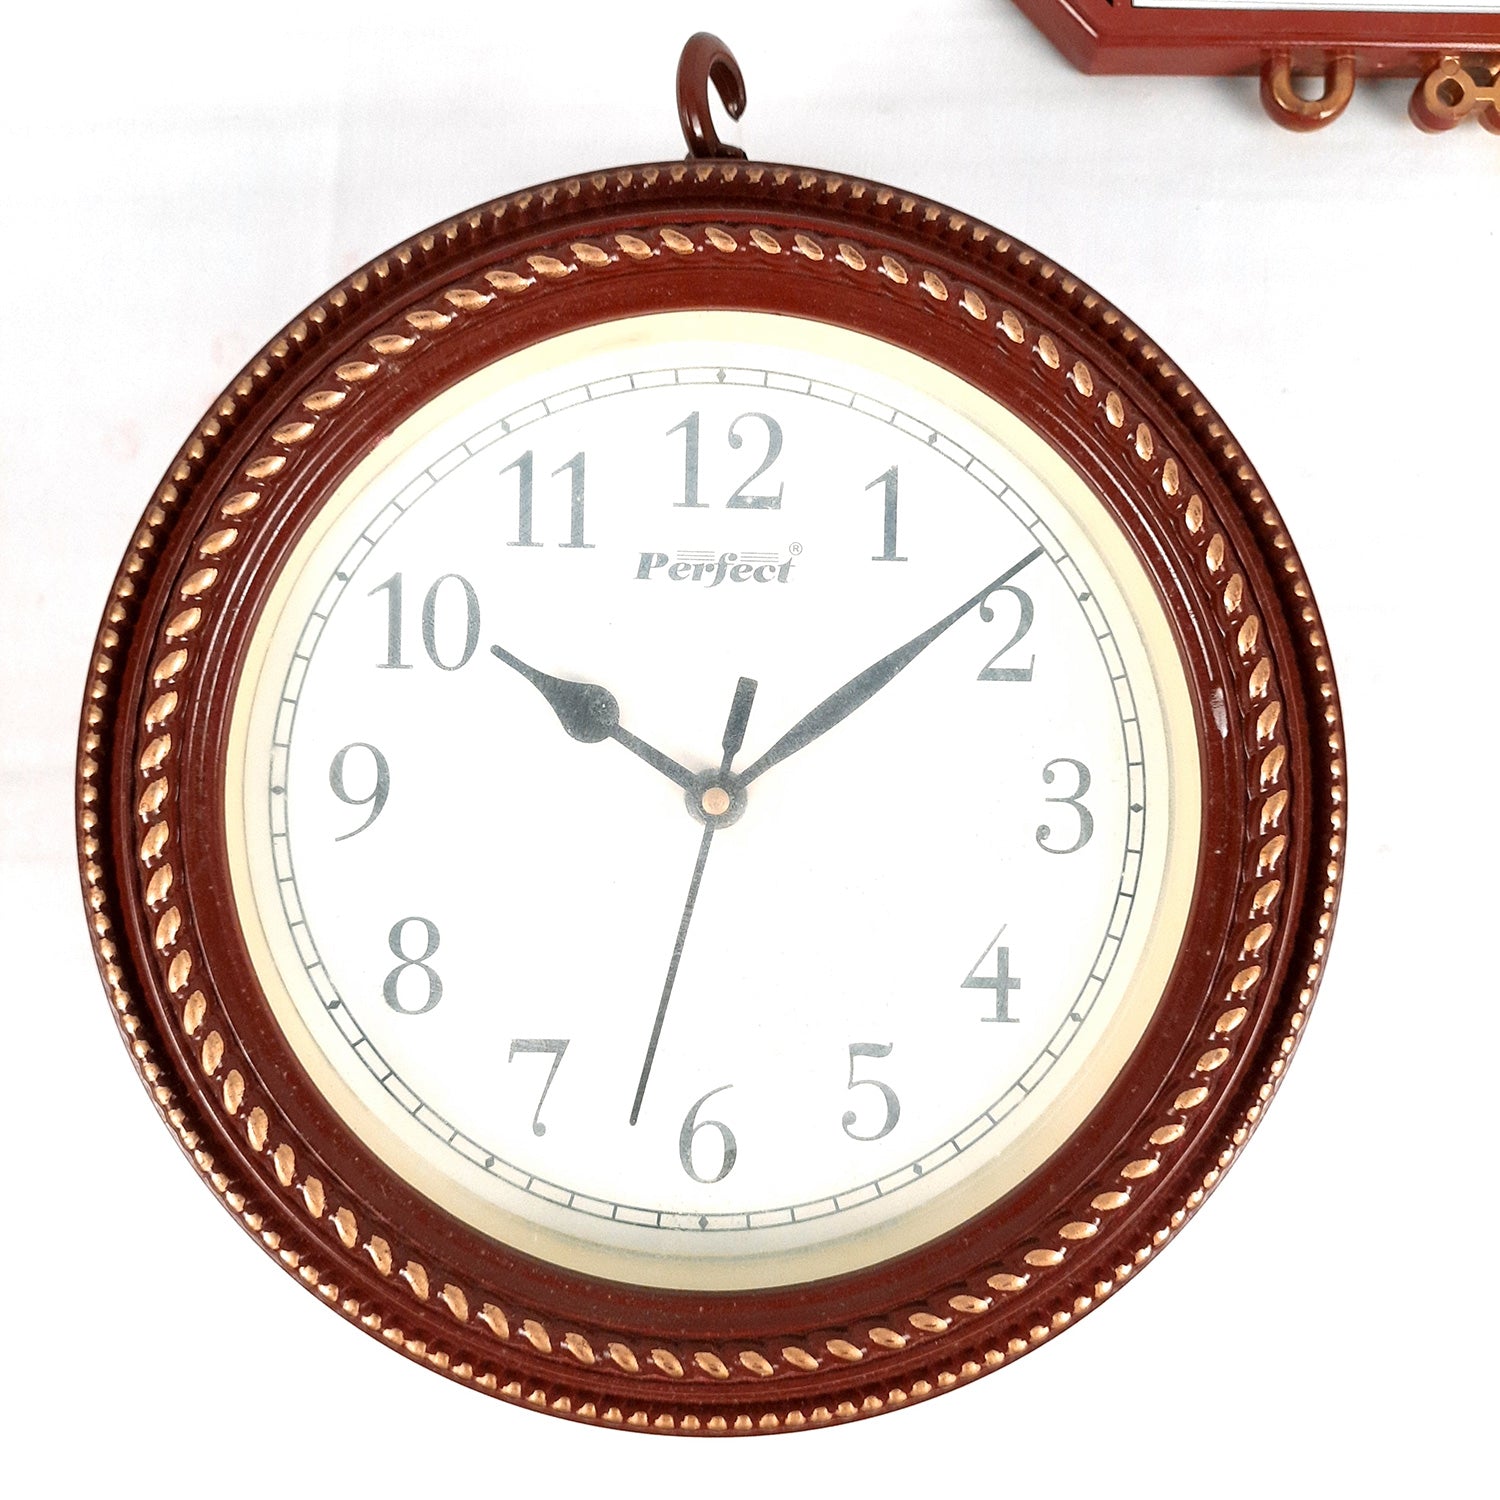 Railway Clocks - Double Sided | Victorian Station Wall Hanging Clock | Vintage Platform Watch - for Home, Living Room, Office Decor & Gifts - 11 Inch - Apkamart #Color_Brown